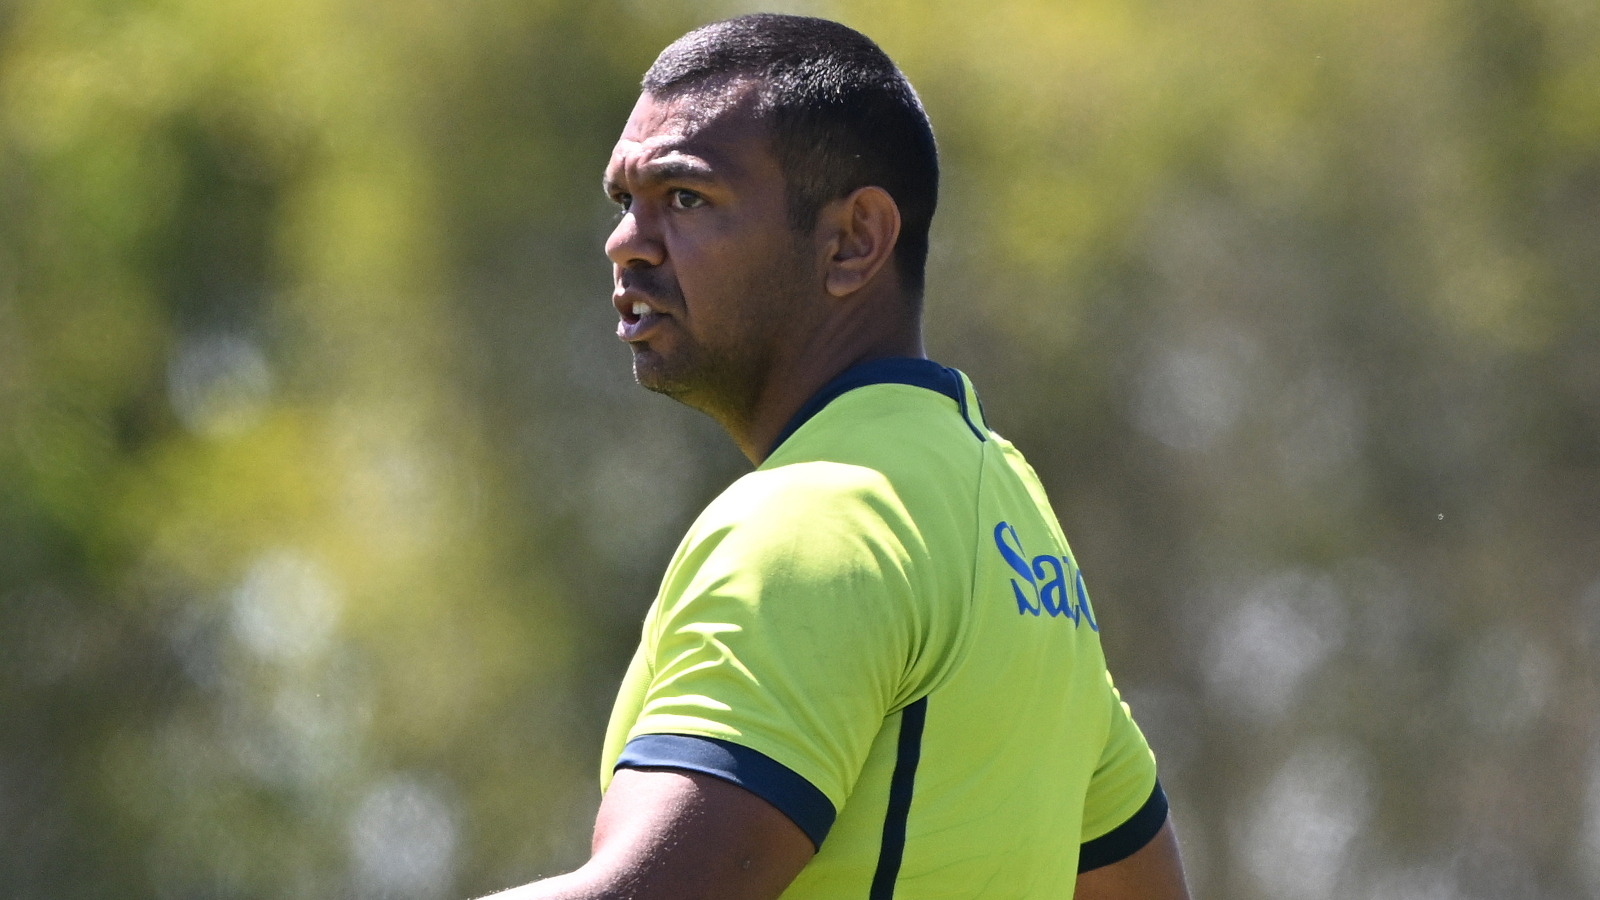 kurtley beale makes emotional speech after force’s triumph over crusaders